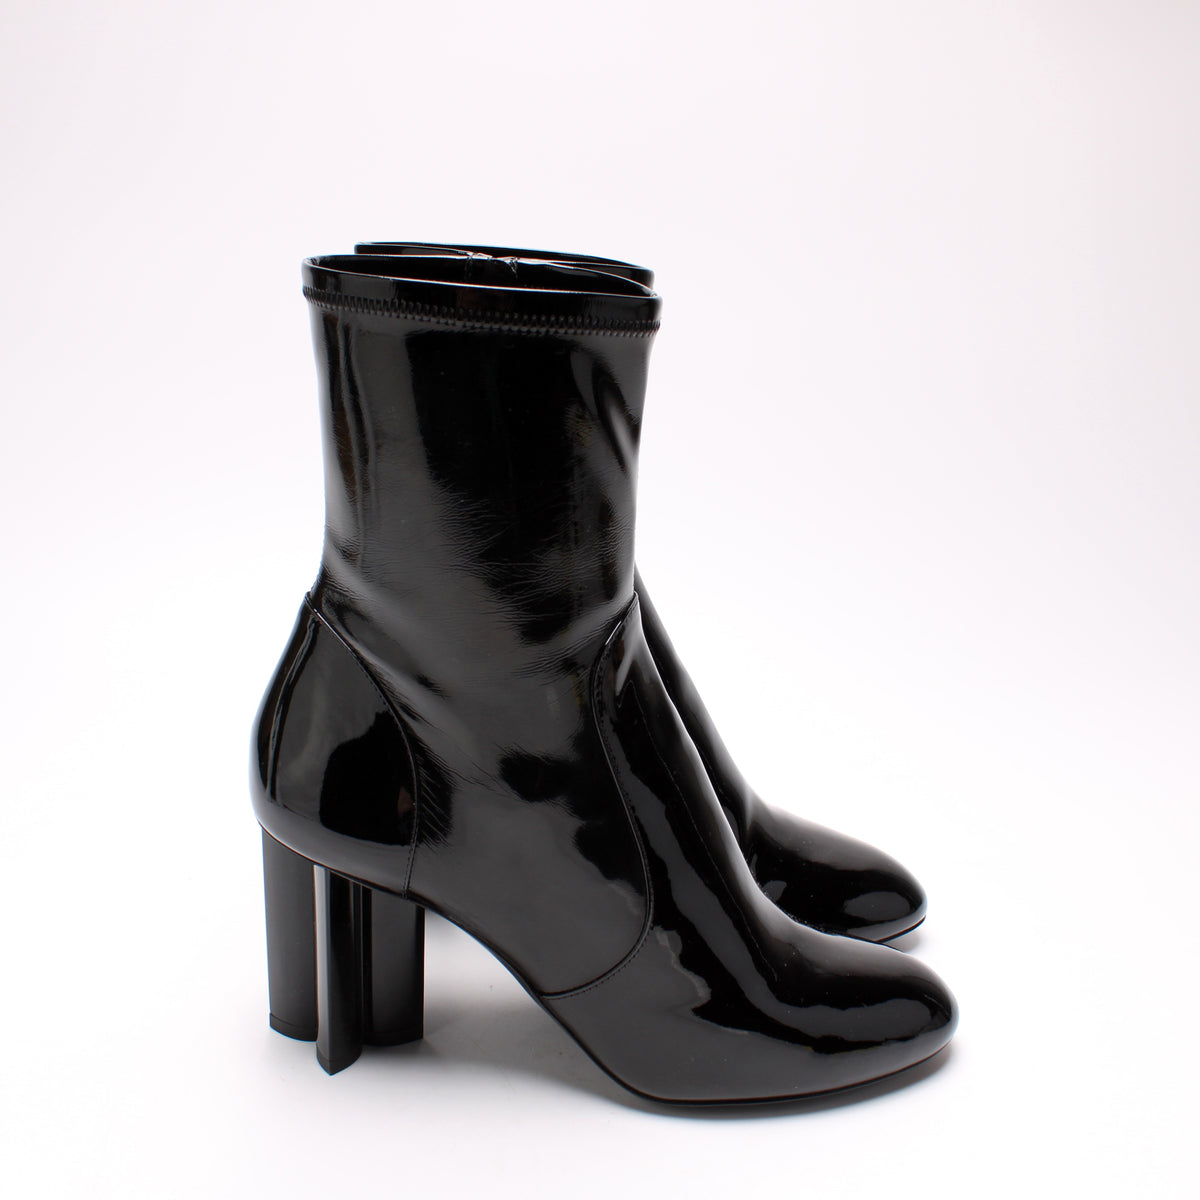 Silhouette ankle boot